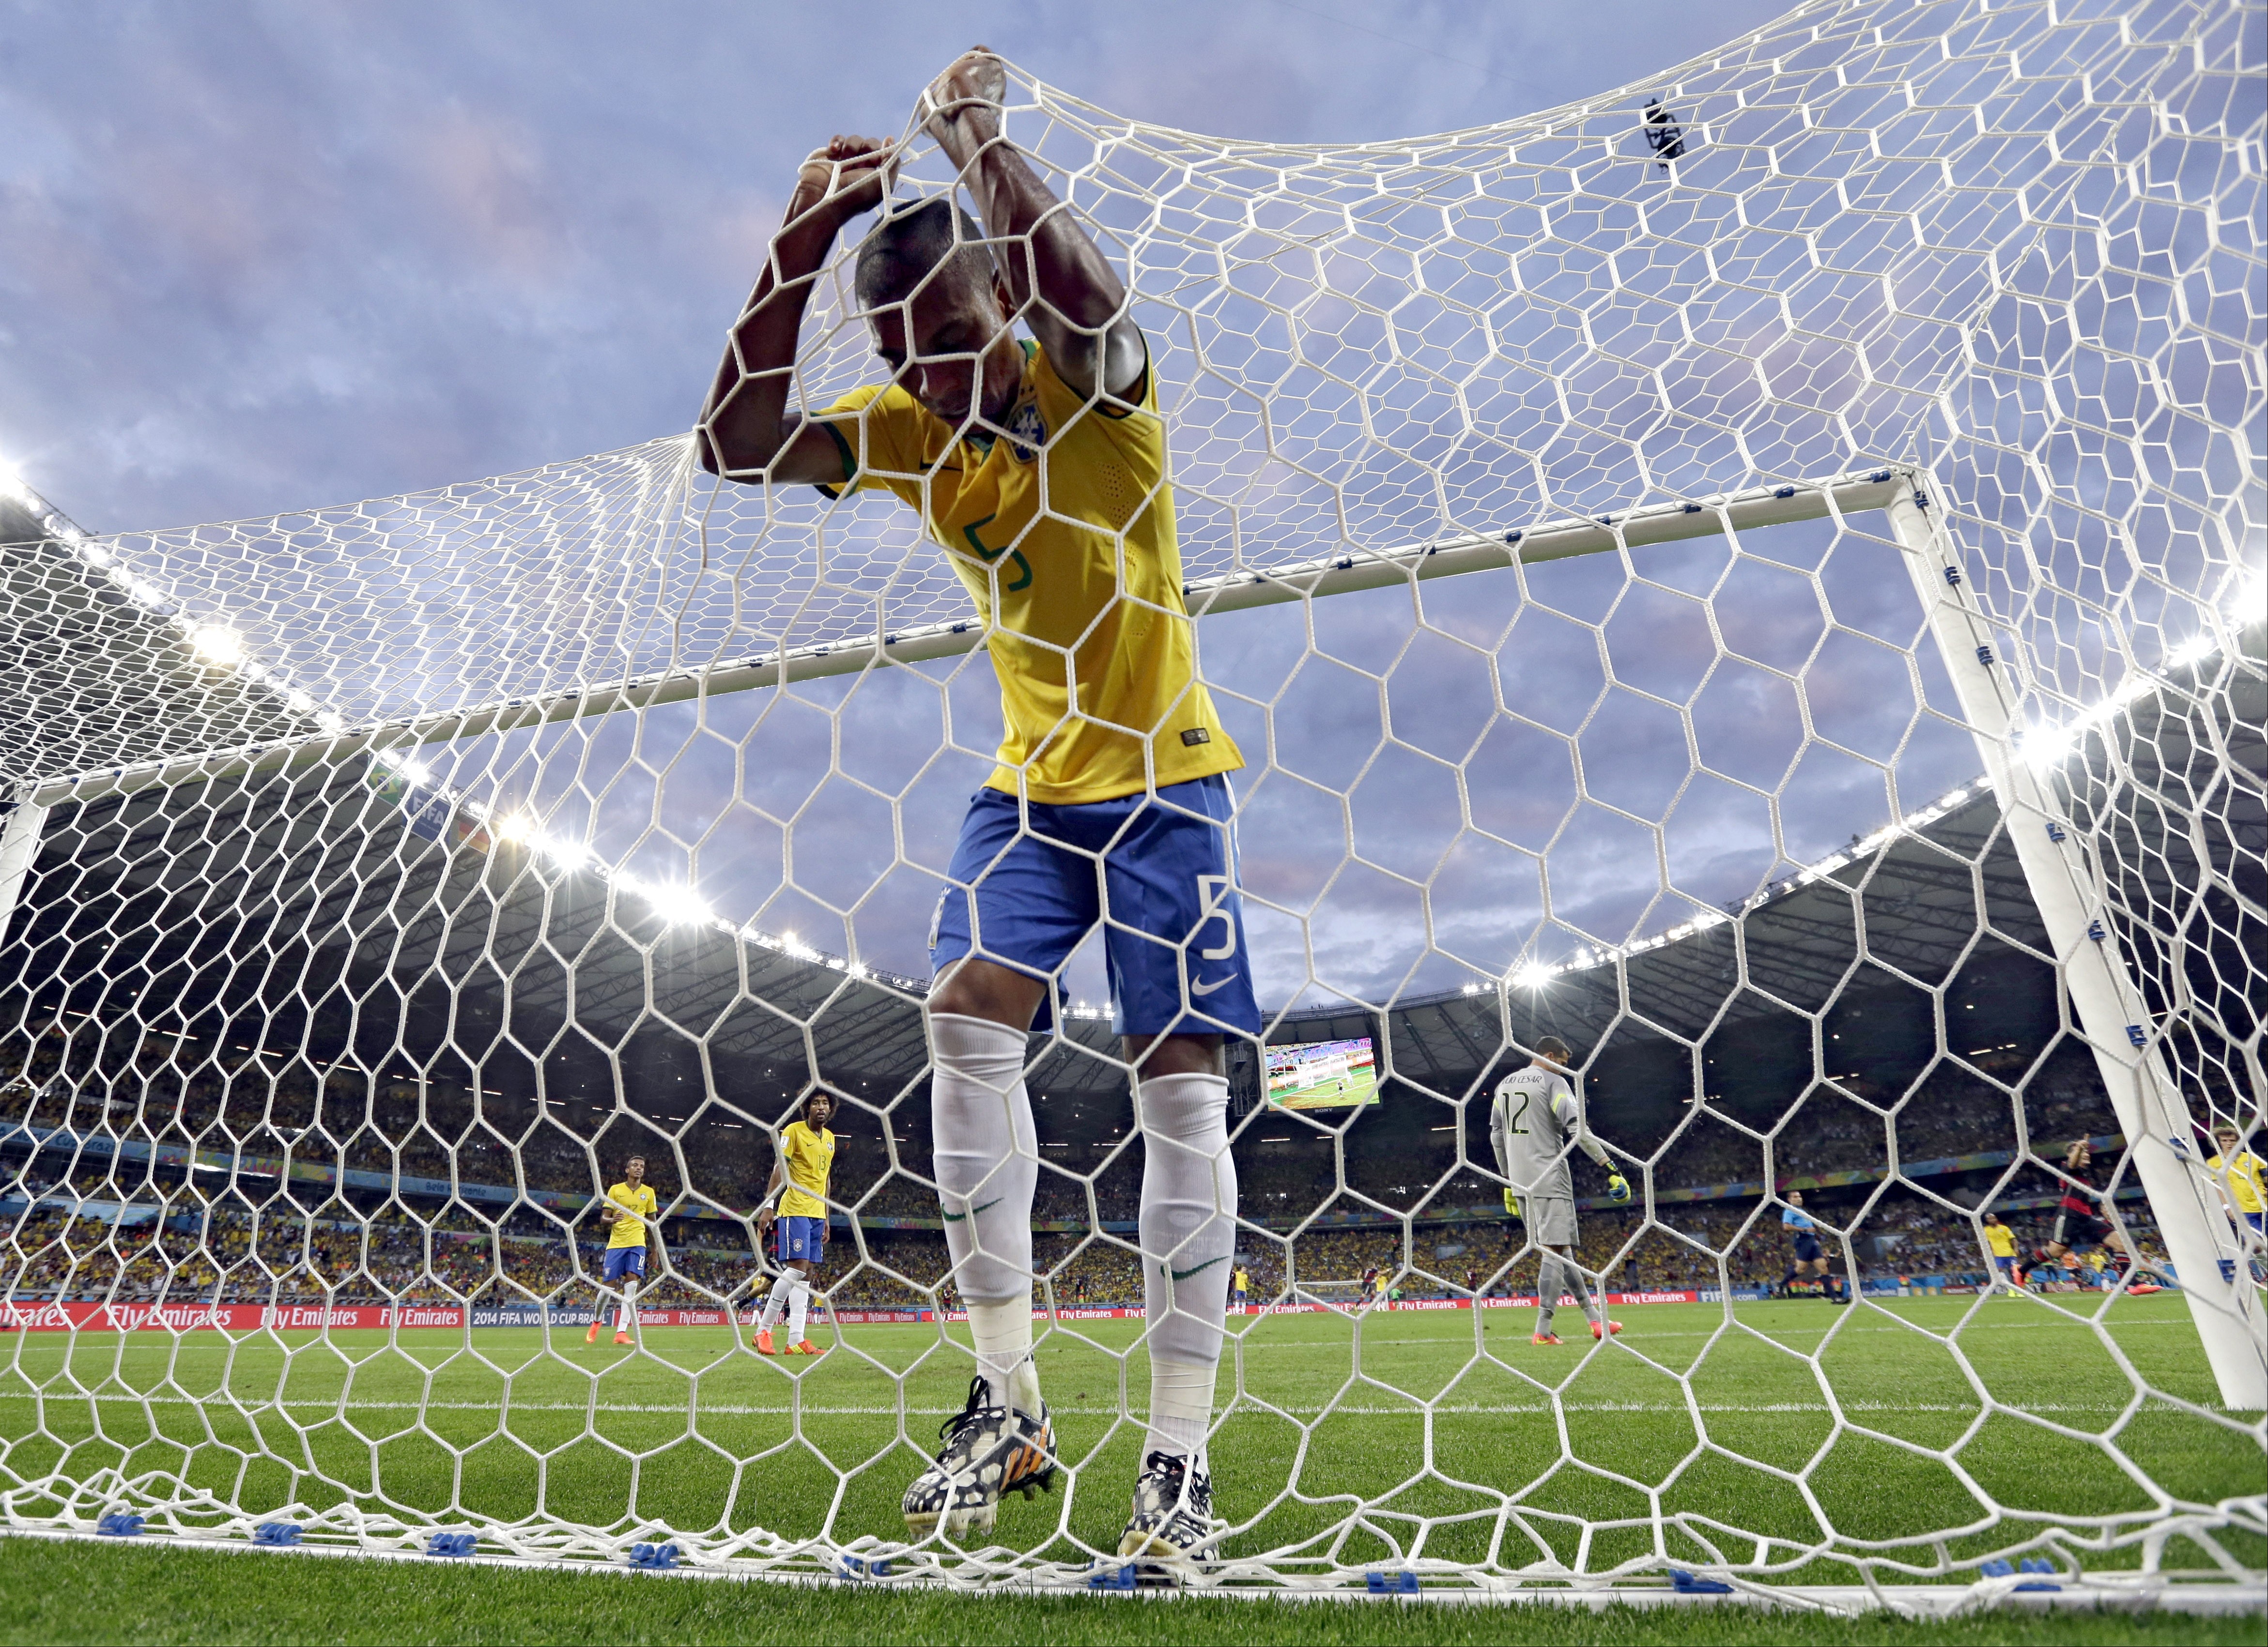 Brazil's Fernandinho reacts after Germany's Toni Kroos scores a third goal for Germany in their World Cup semi-final soccer match in Belo Horizonte, Brazil. Photo: AP